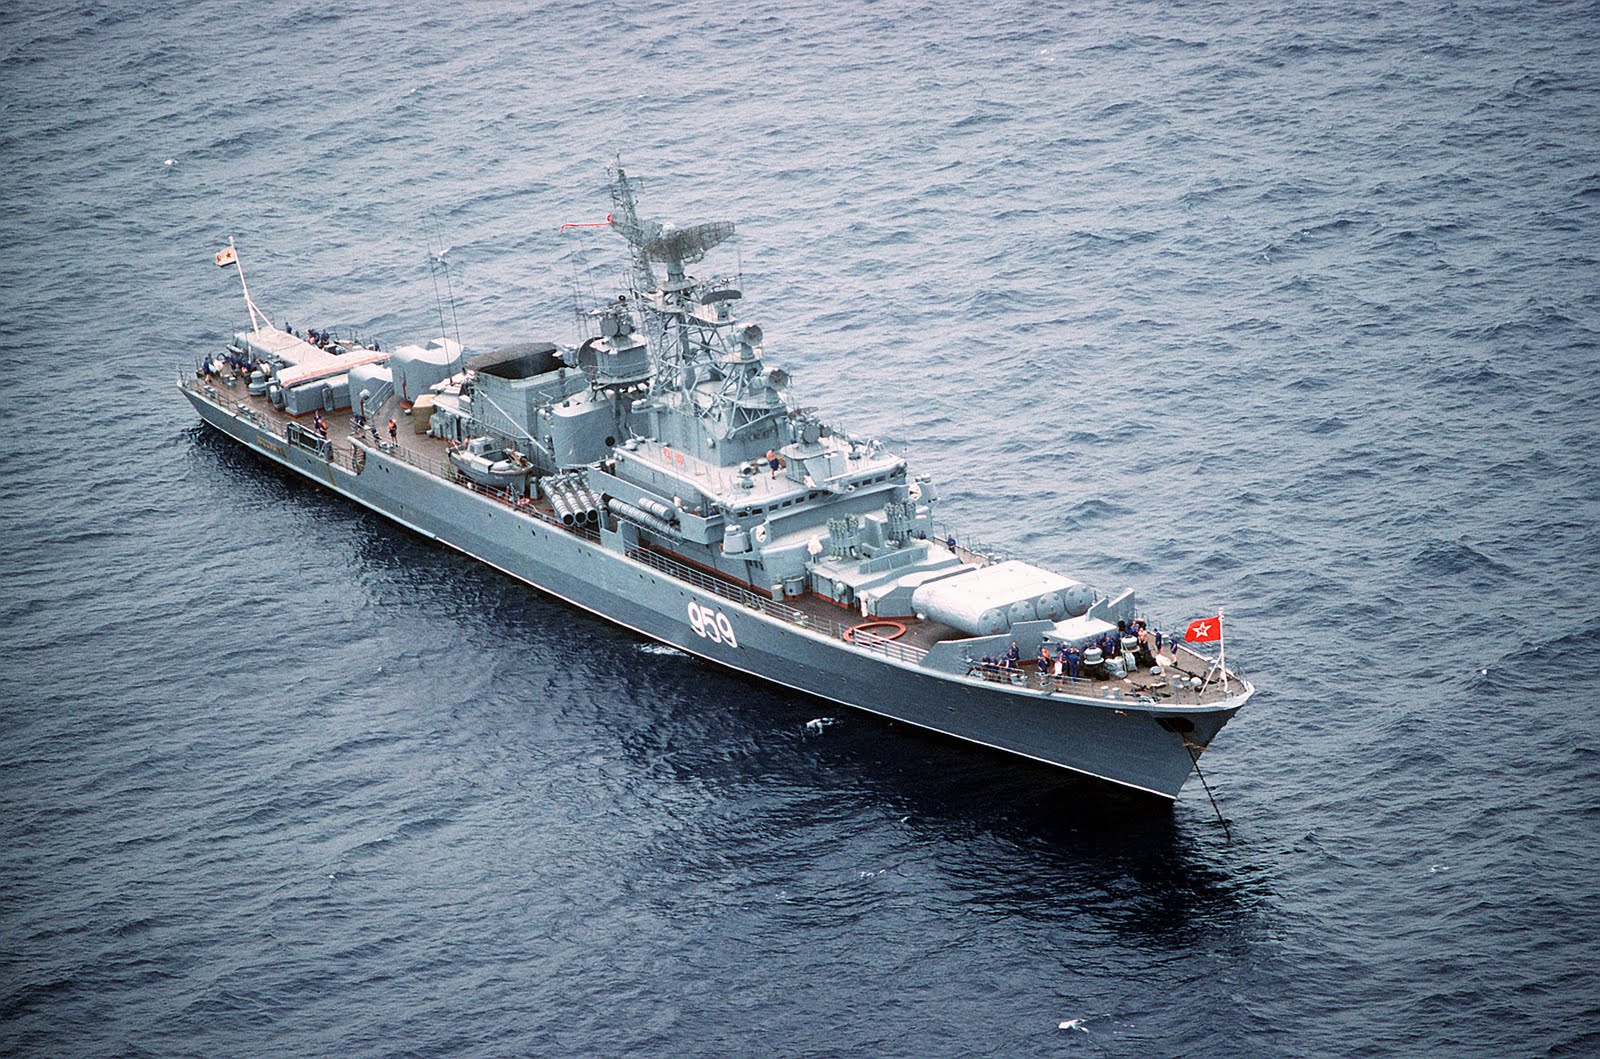 An aerial starboard bow view of the Soviet Krivak I Class guided missile frigate 959 at anchor.